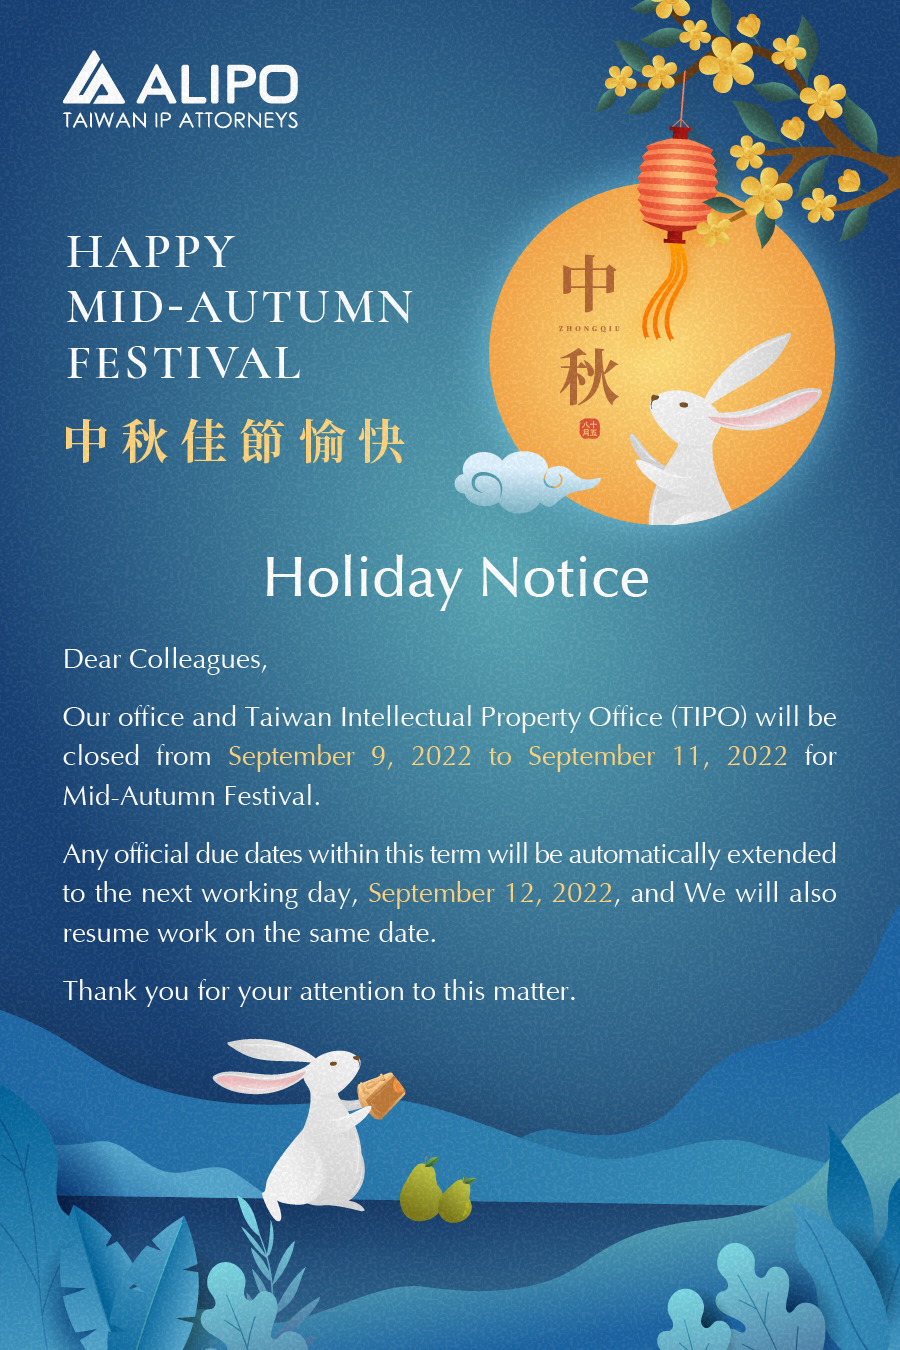 Dear Colleagues,  Our office and Taiwan Intellectual Property Office (TIPO) will be closed from September 9, 2022 to September 11, 2022 for Mid-Autumn Festival. 